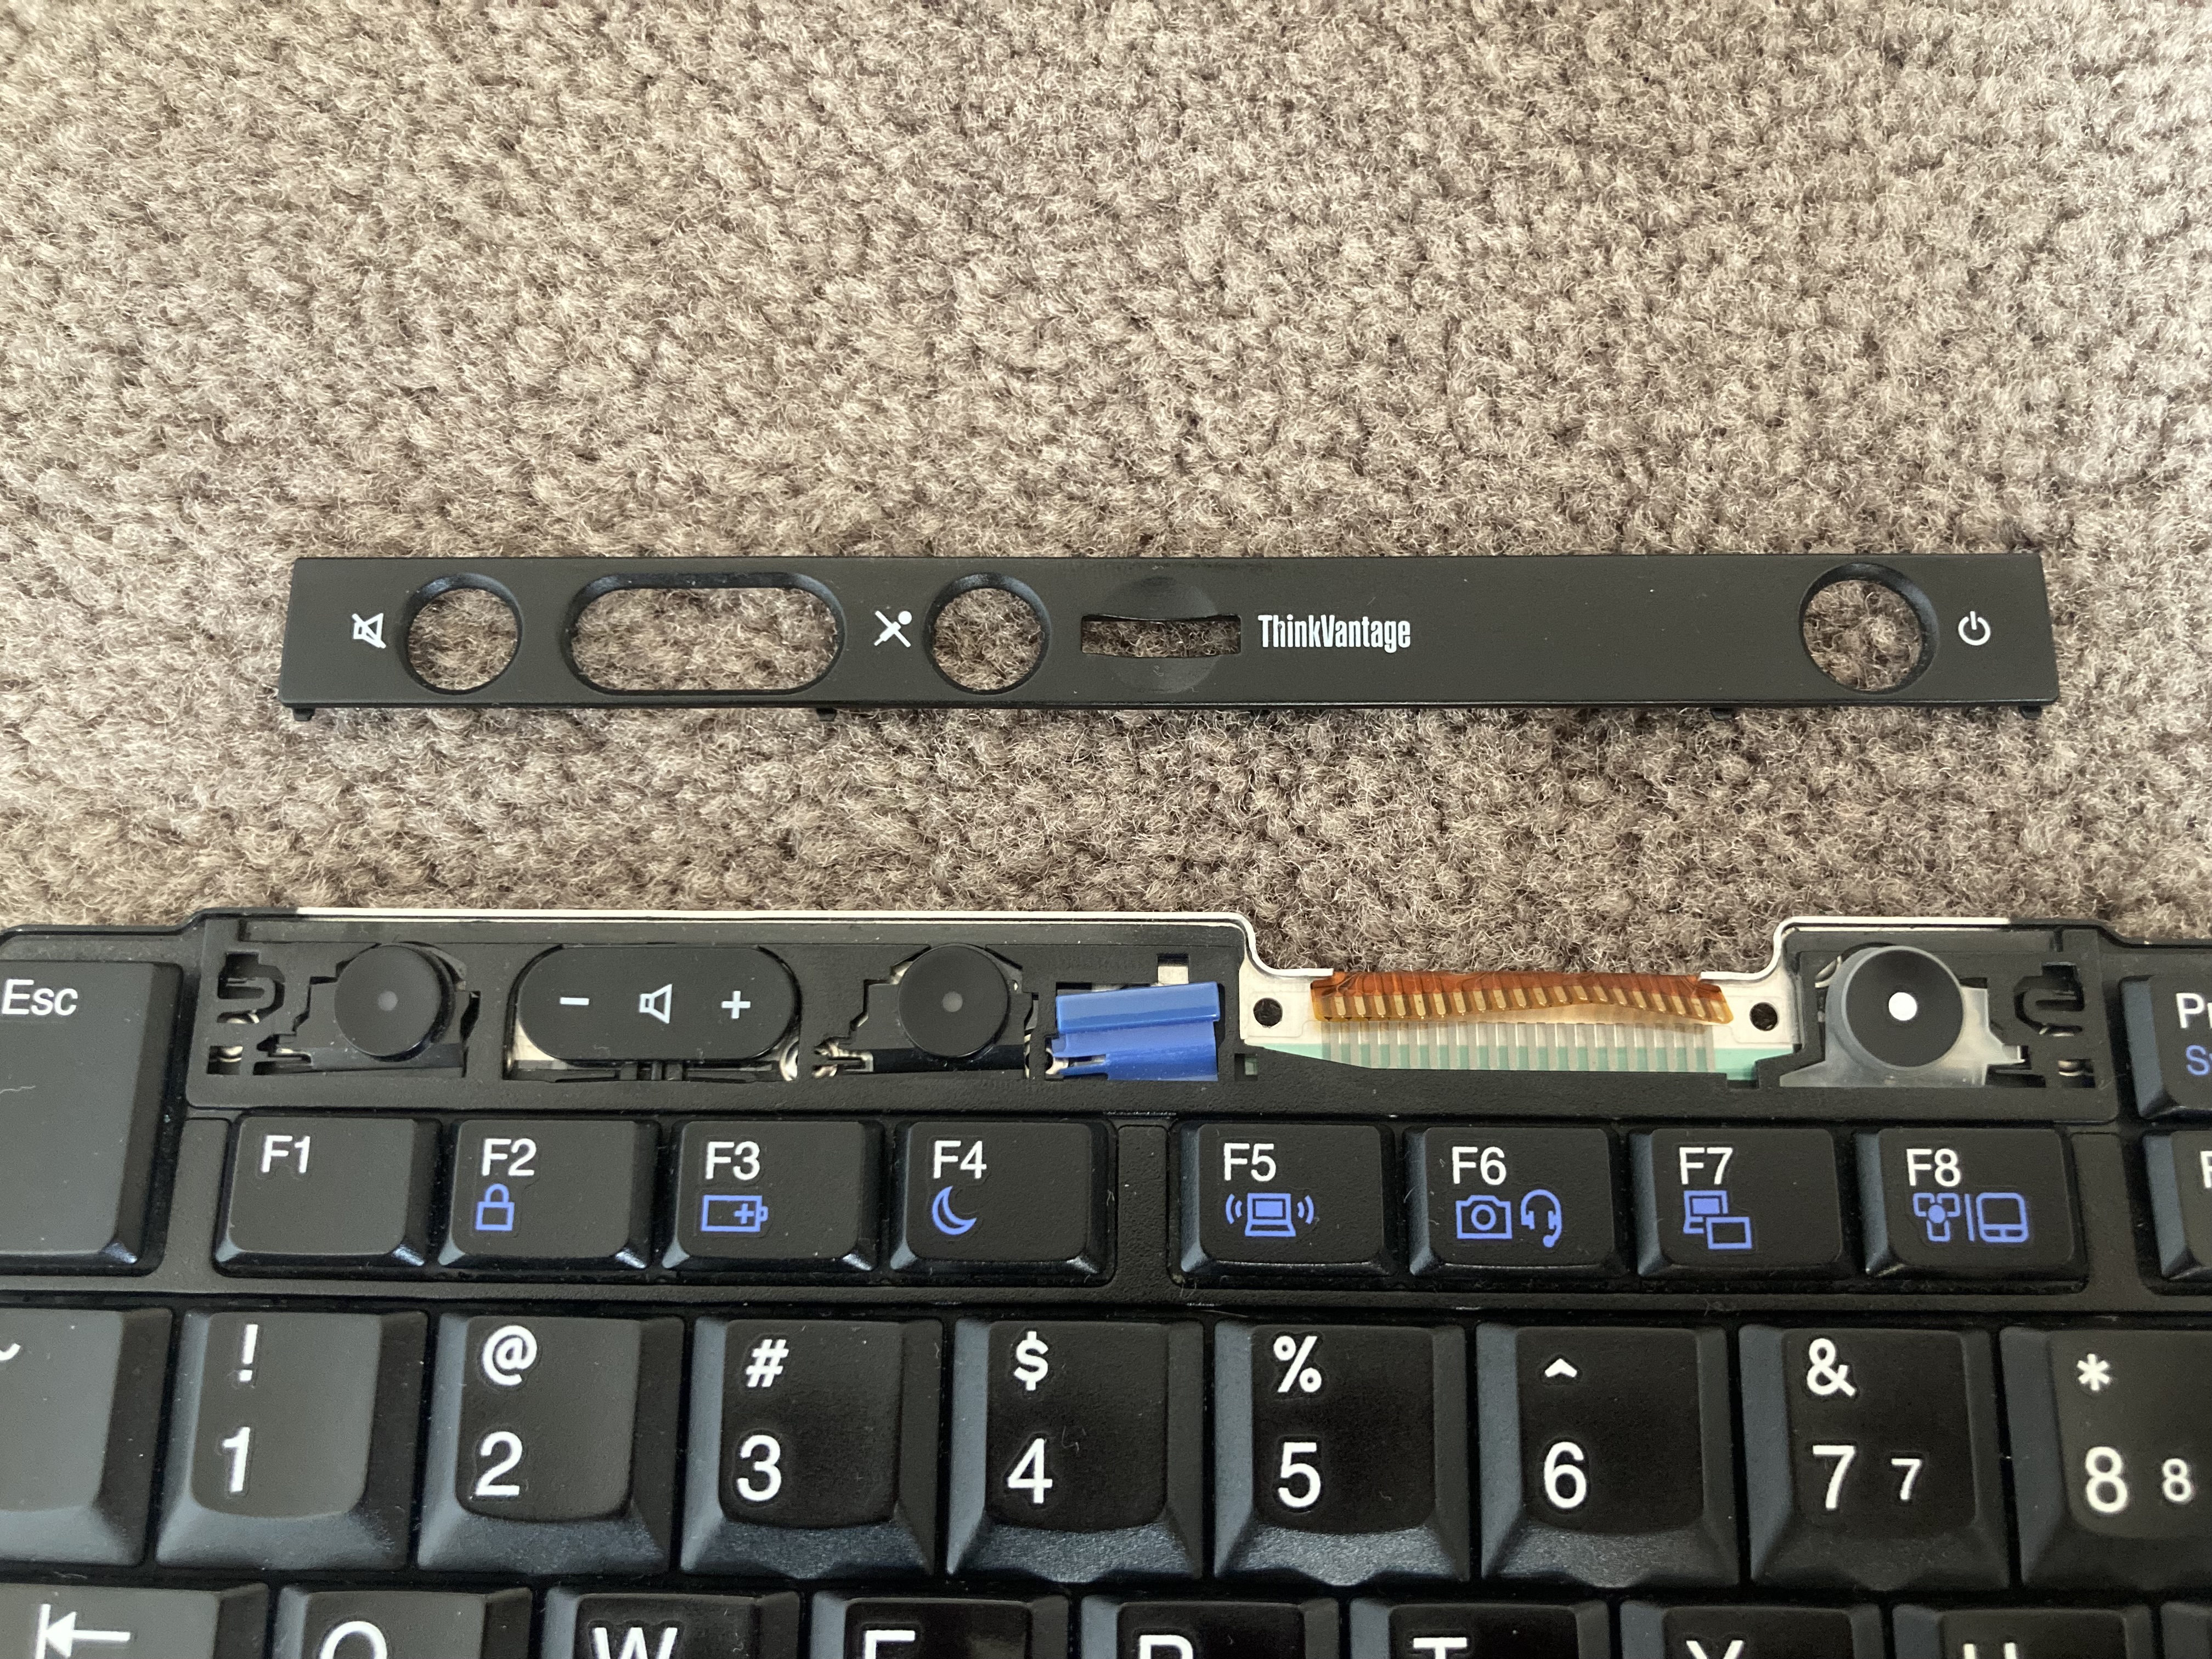 The top of the x220 keyboard
with the function buttons faceplate removed